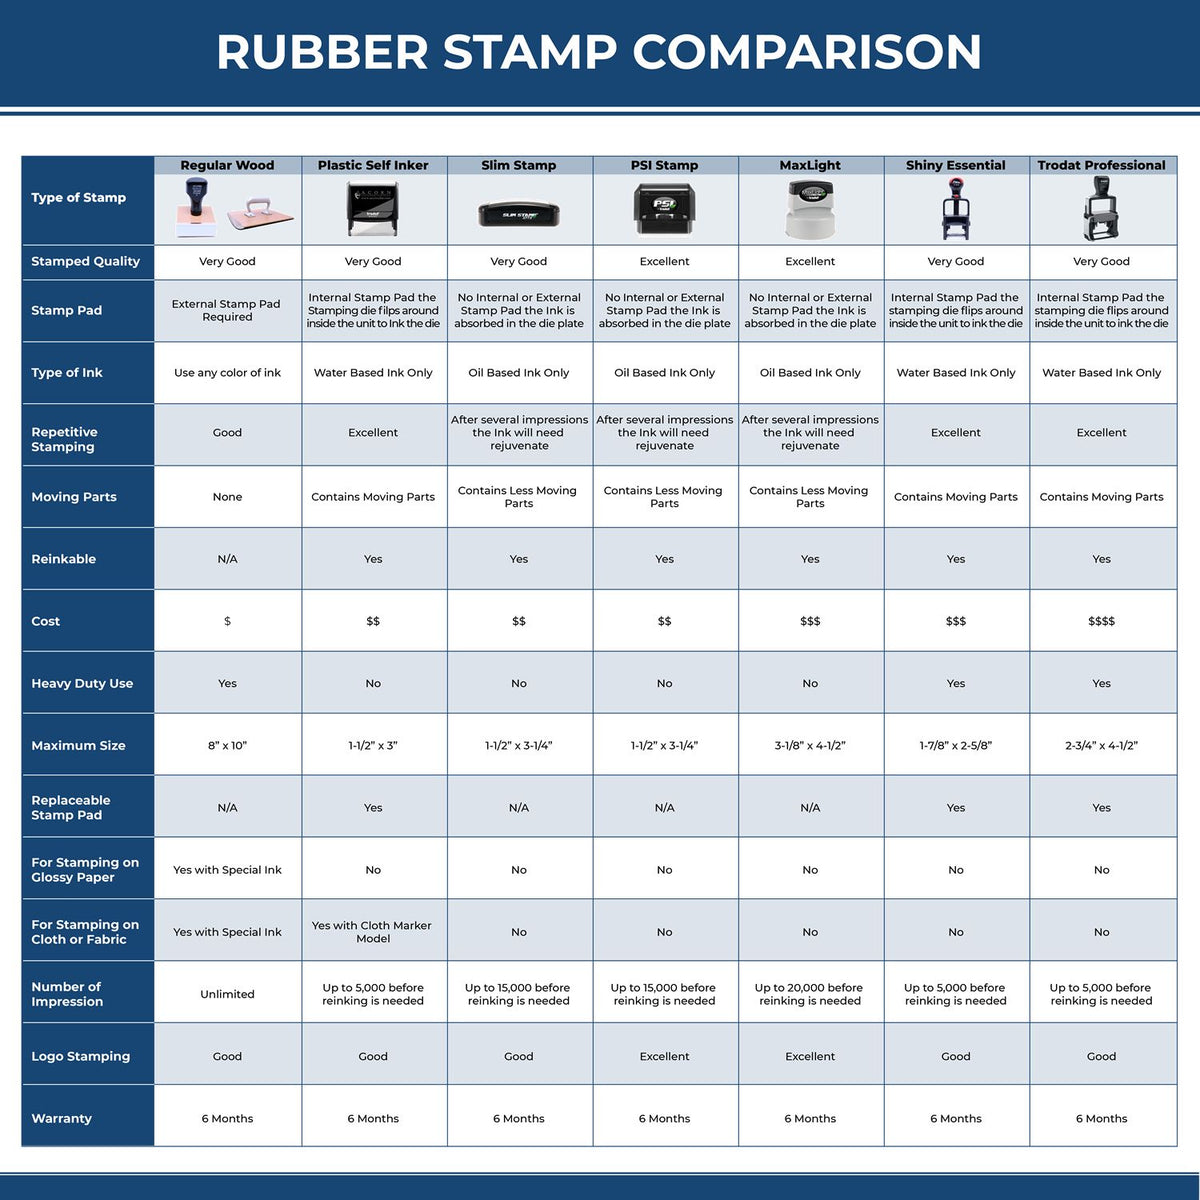 A comparison chart for the different types of mount models available for the MaxLight Premium Pre-Inked Missouri Rectangular Notarial Stamp.